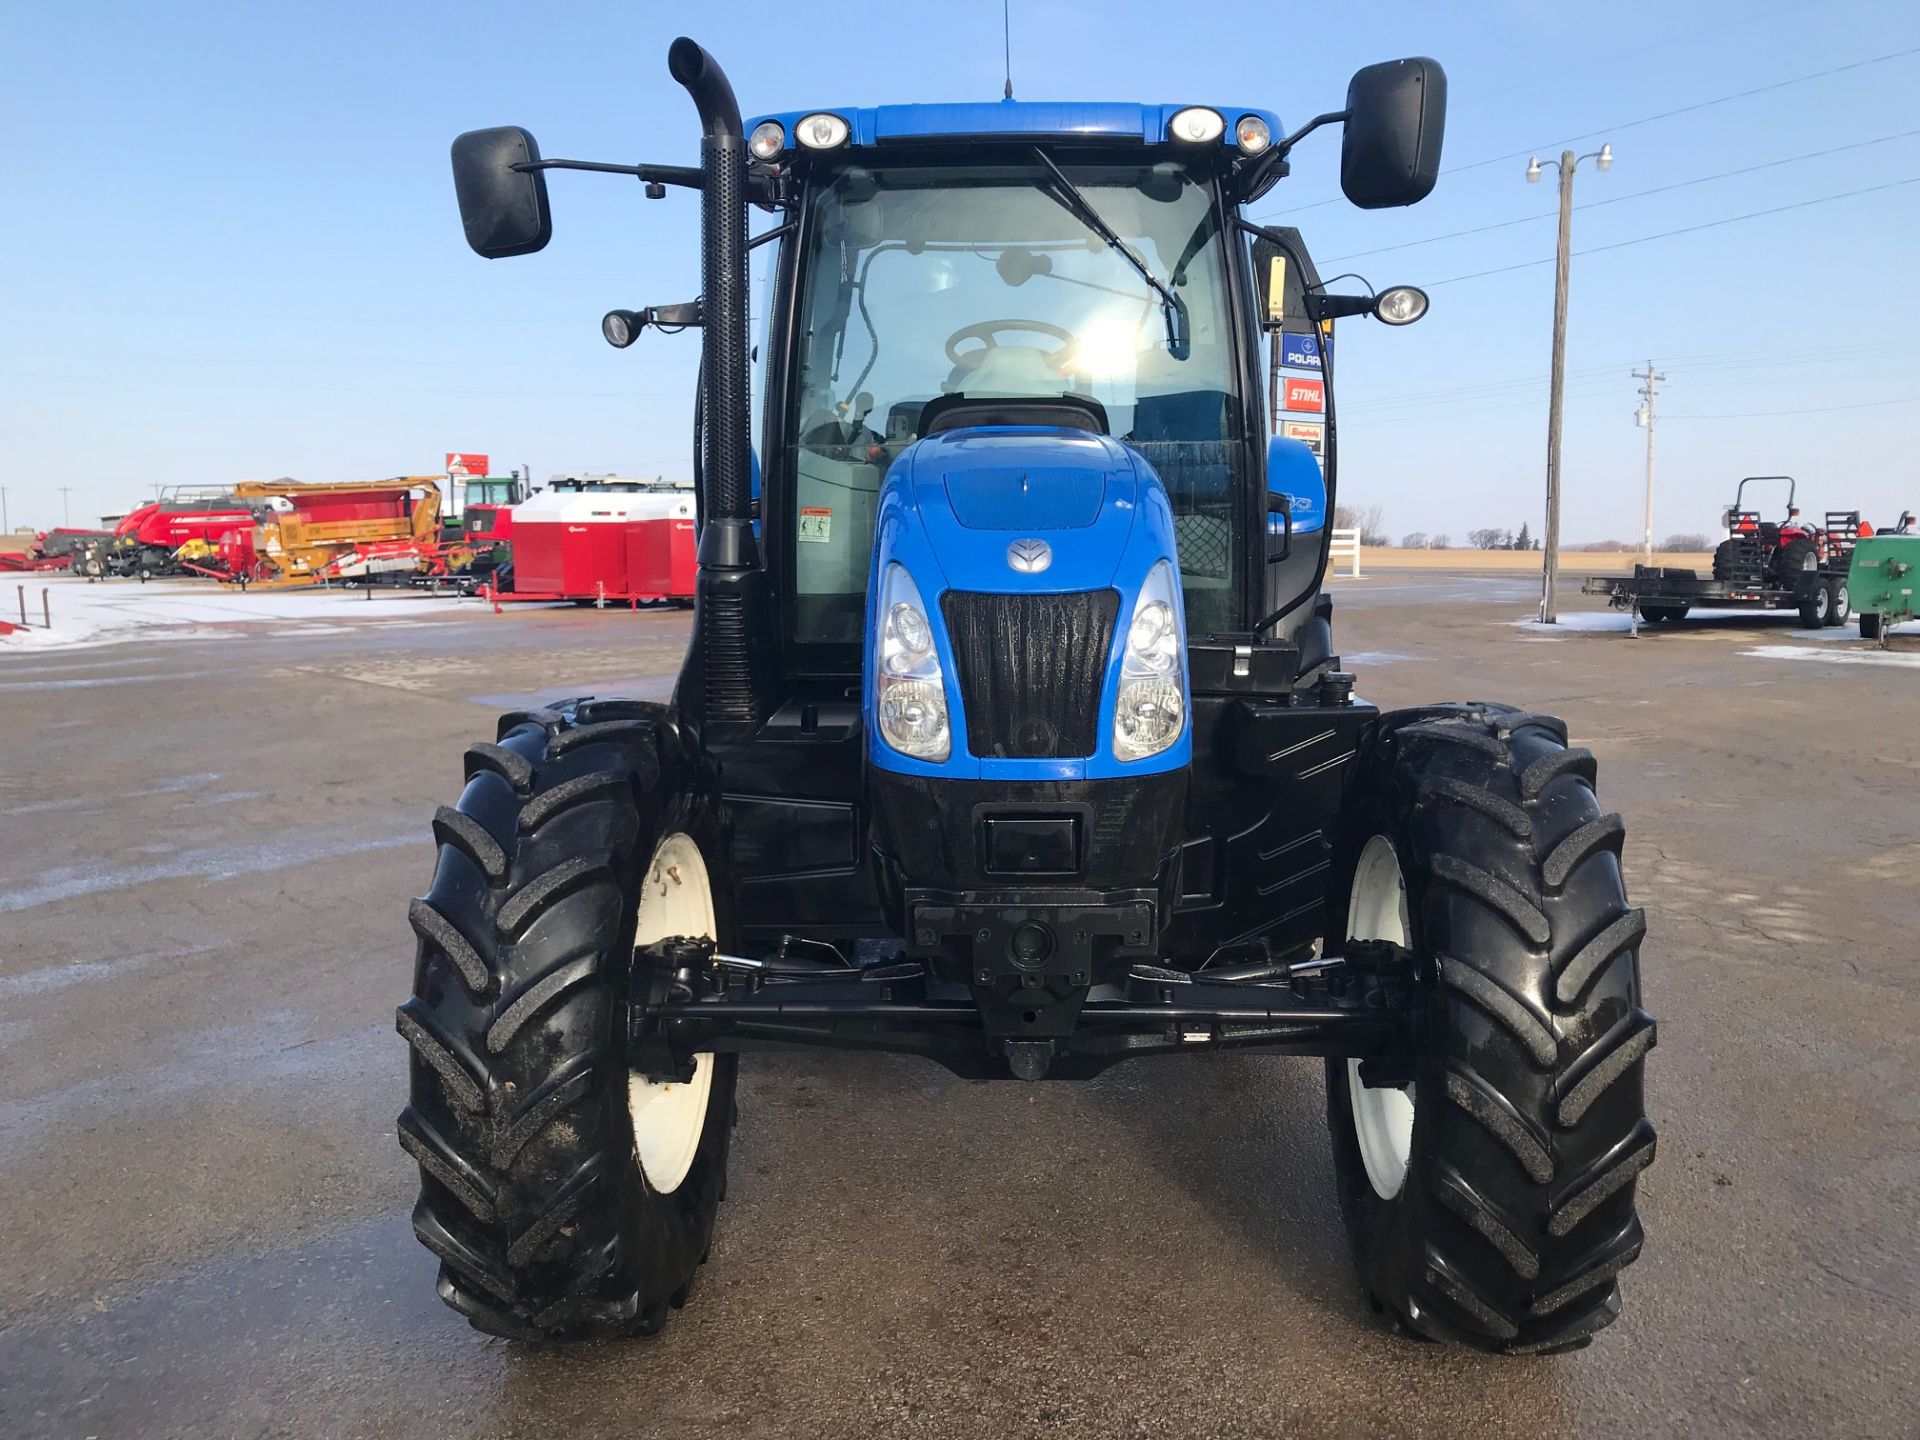 '14 New Holland T6.175 MFWD Tractor, SN ZEBD01738 - Image 3 of 7